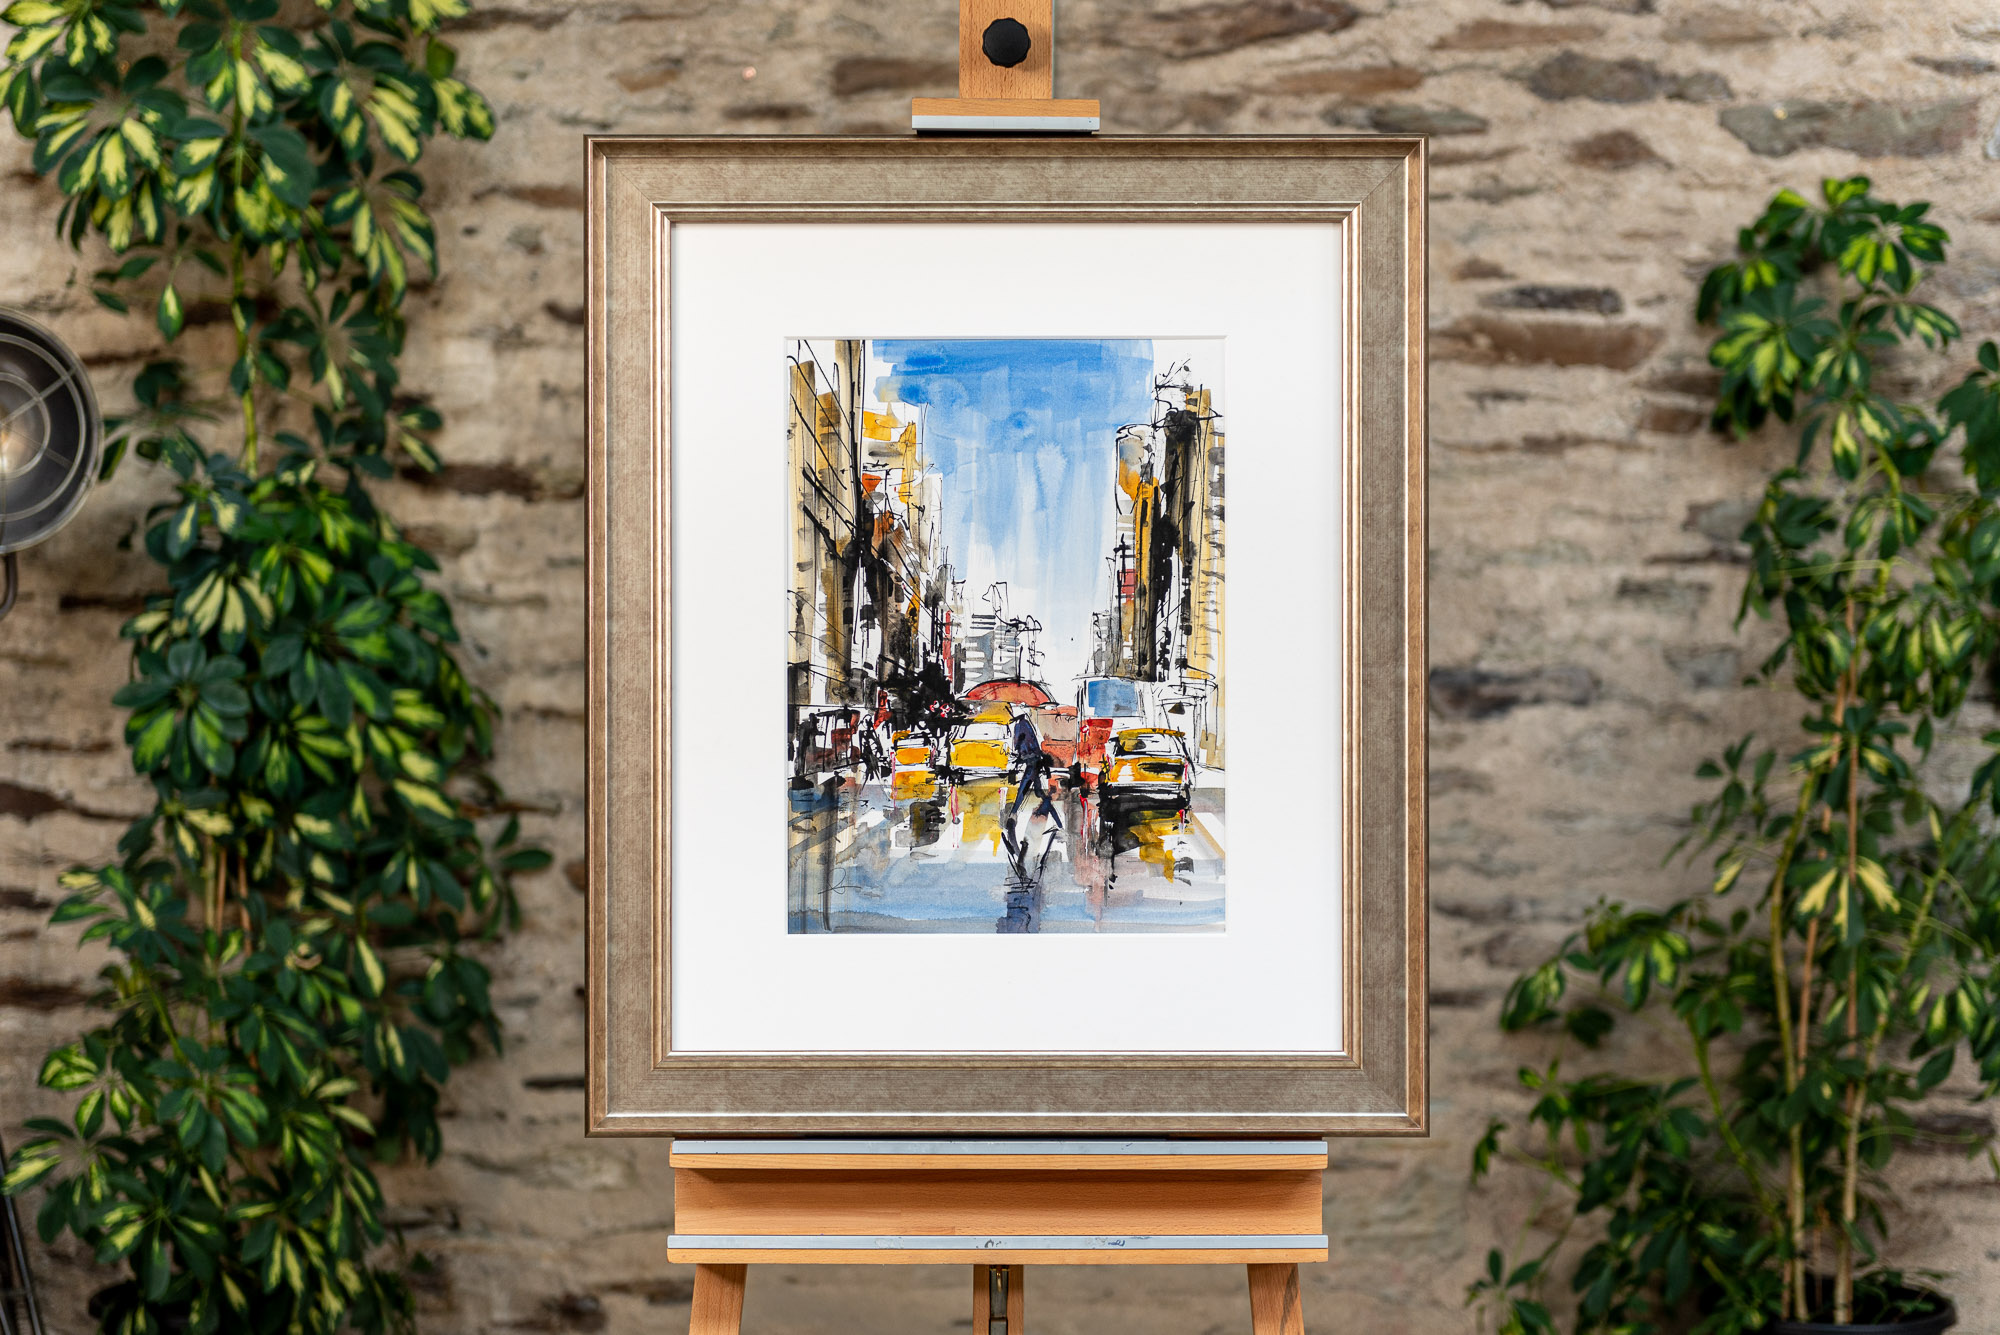 New York Rush - Original New York Cityscape Painting by UK Contemporary Artist Paul Kenton, from the Watercolour Collection